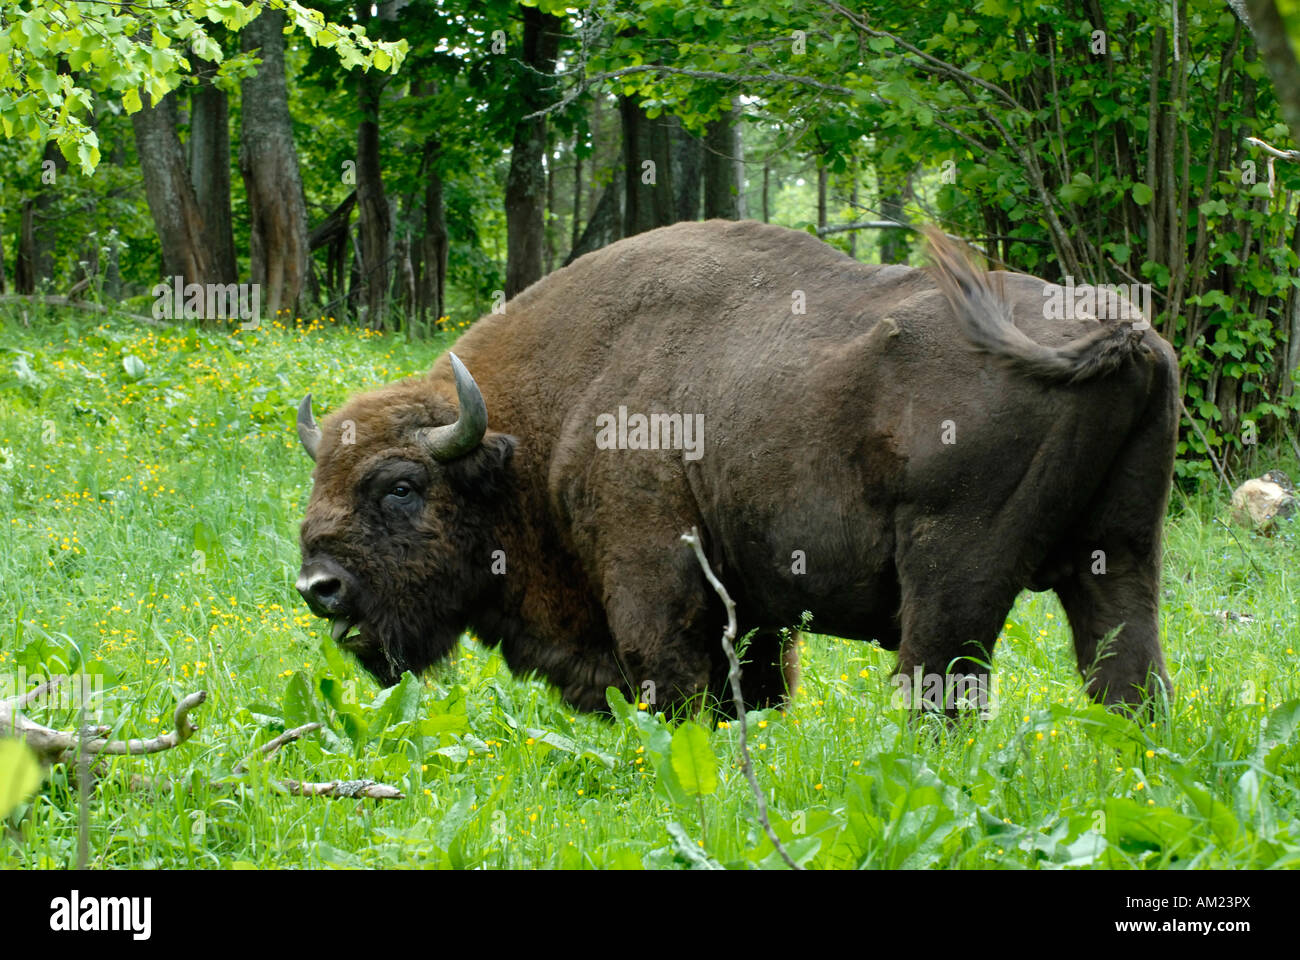 Wisent or European Bison (Bison bonasus), bull standing on a clearing Stock Photo